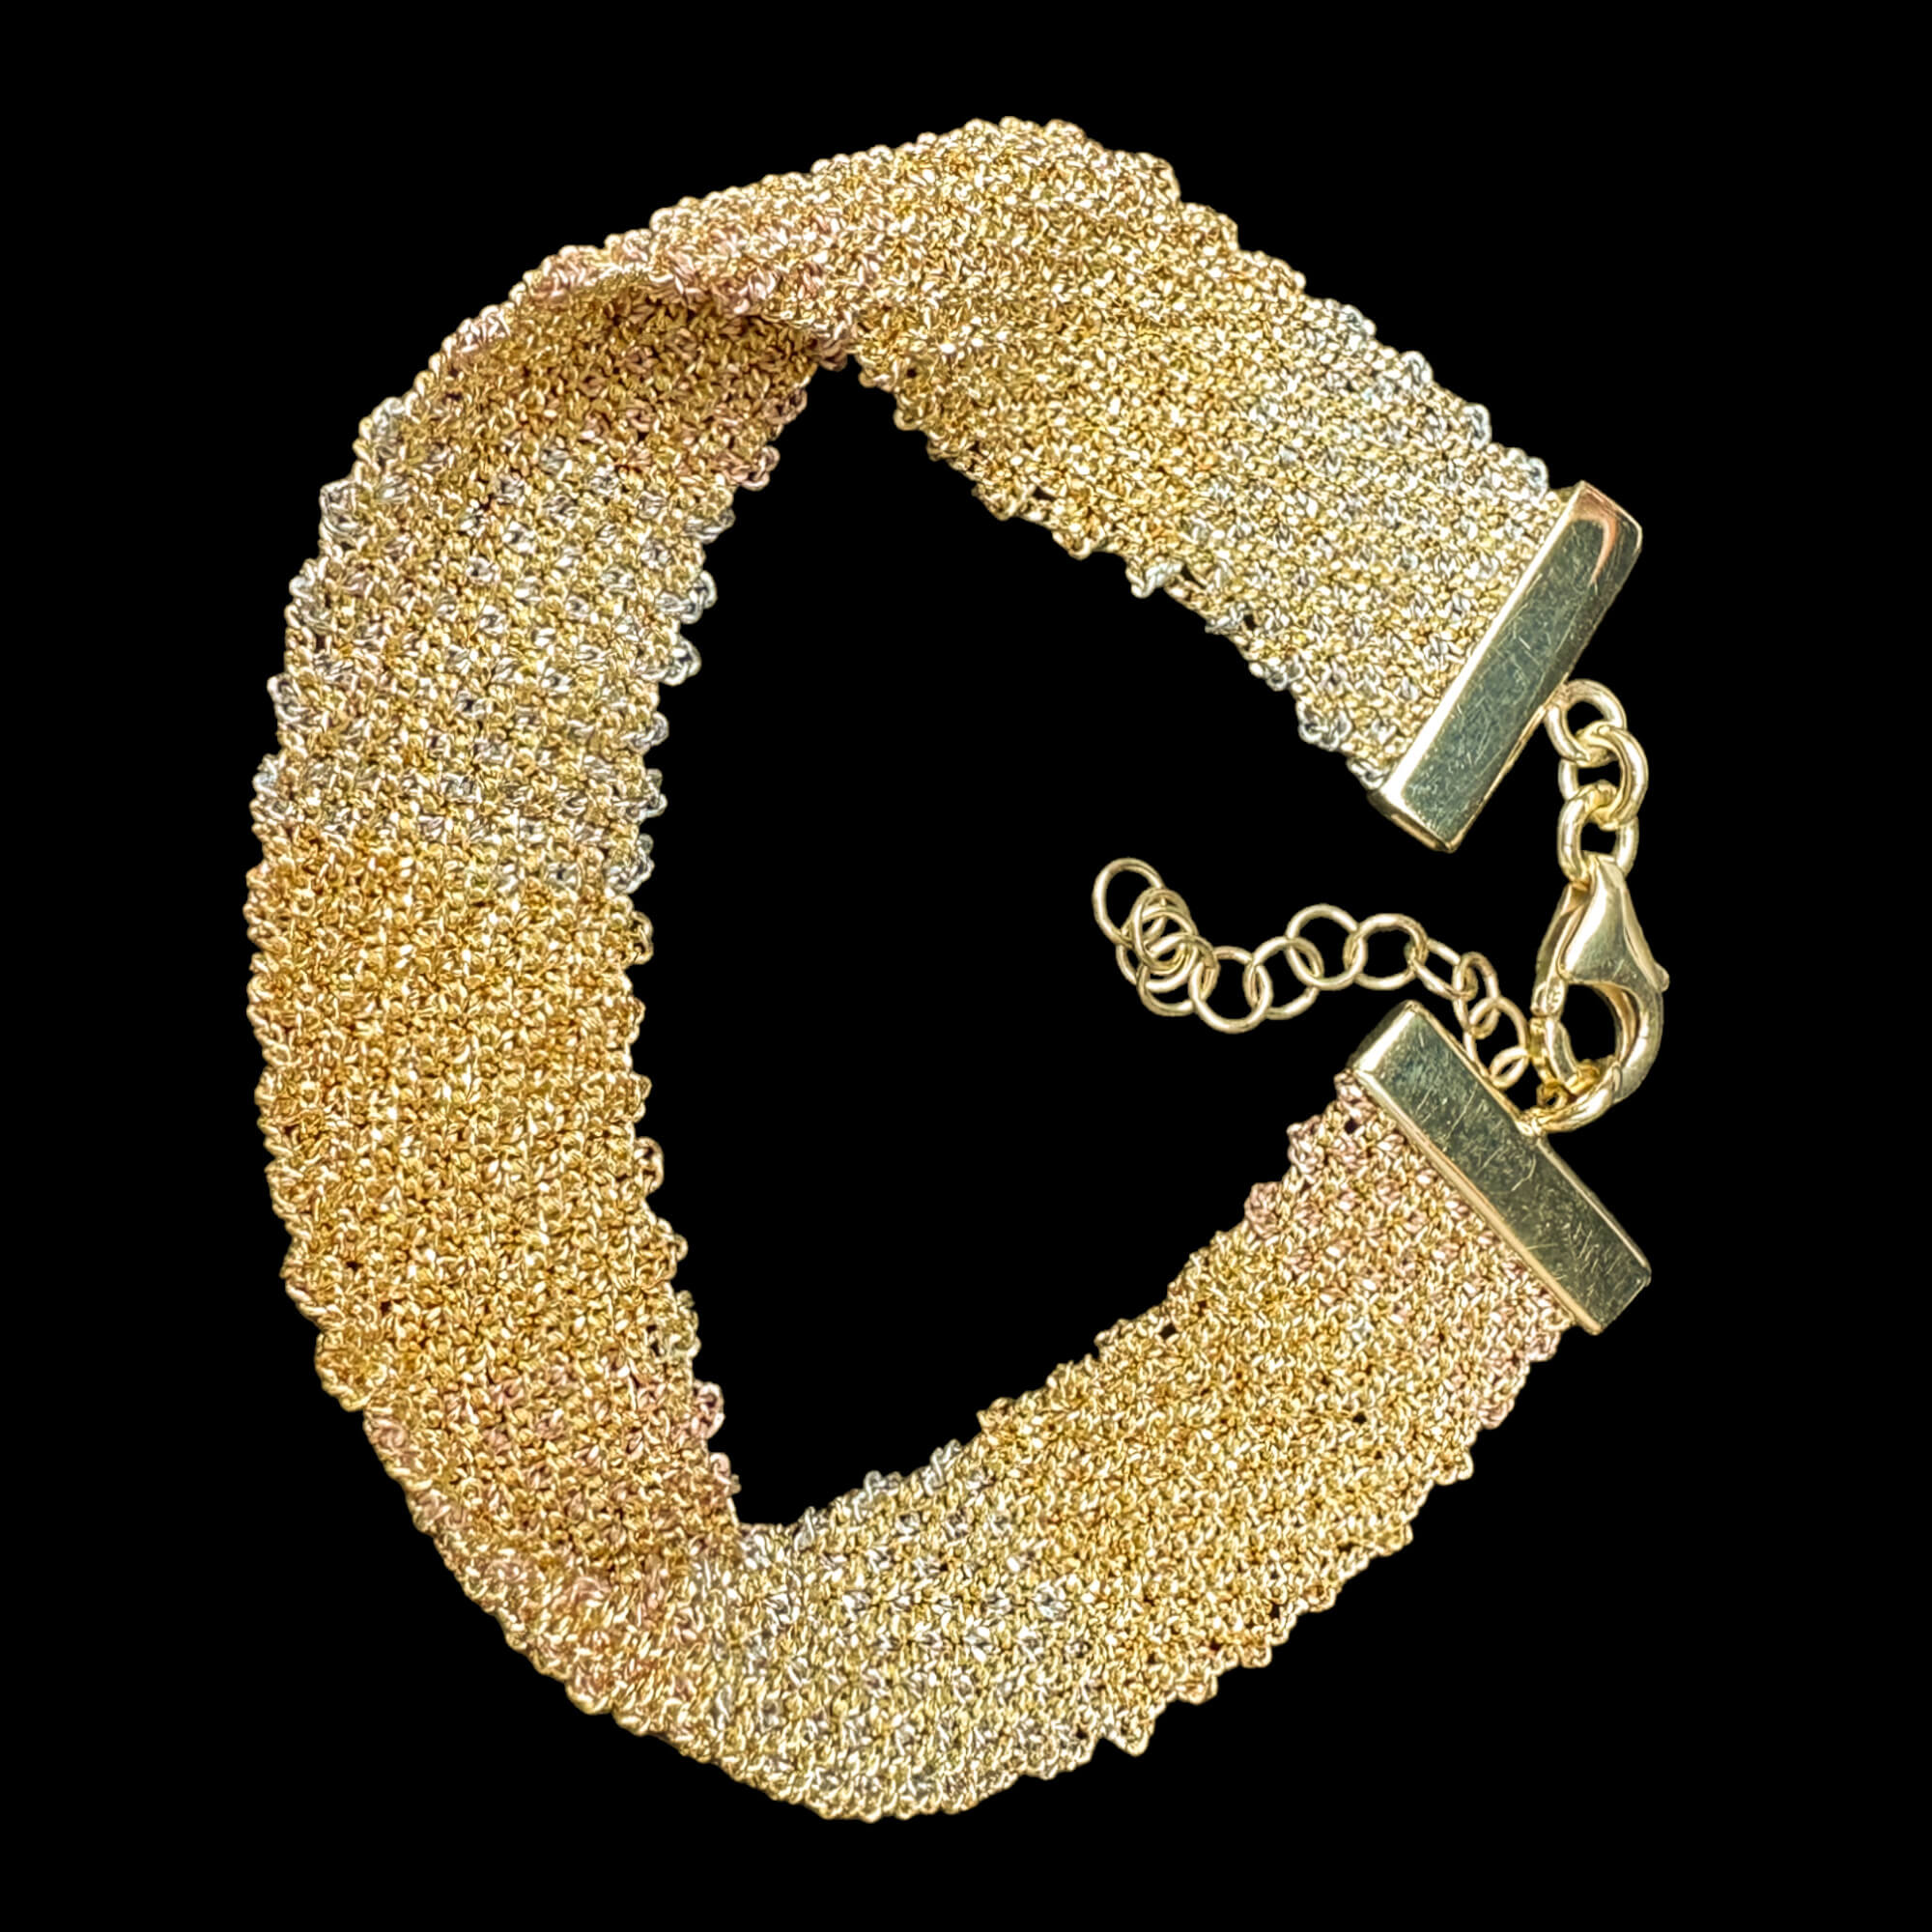 Three-colored gold-plated bracelet of interwoven chains